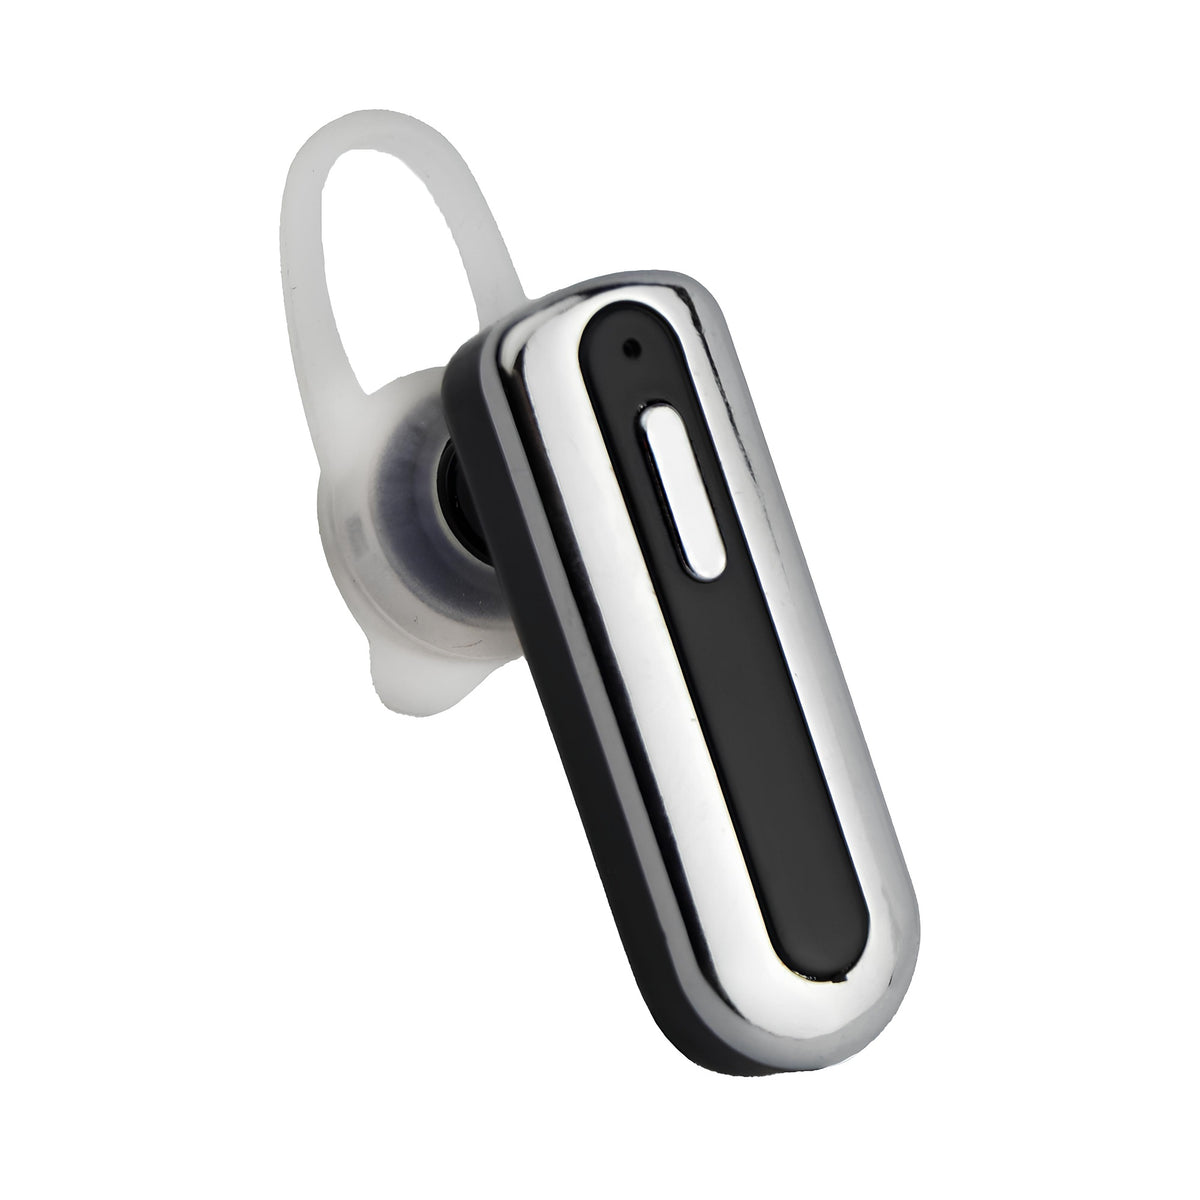 M11 Bluetooth Wireless Headset Right Ear Single Earbuds For phone & Android Phone